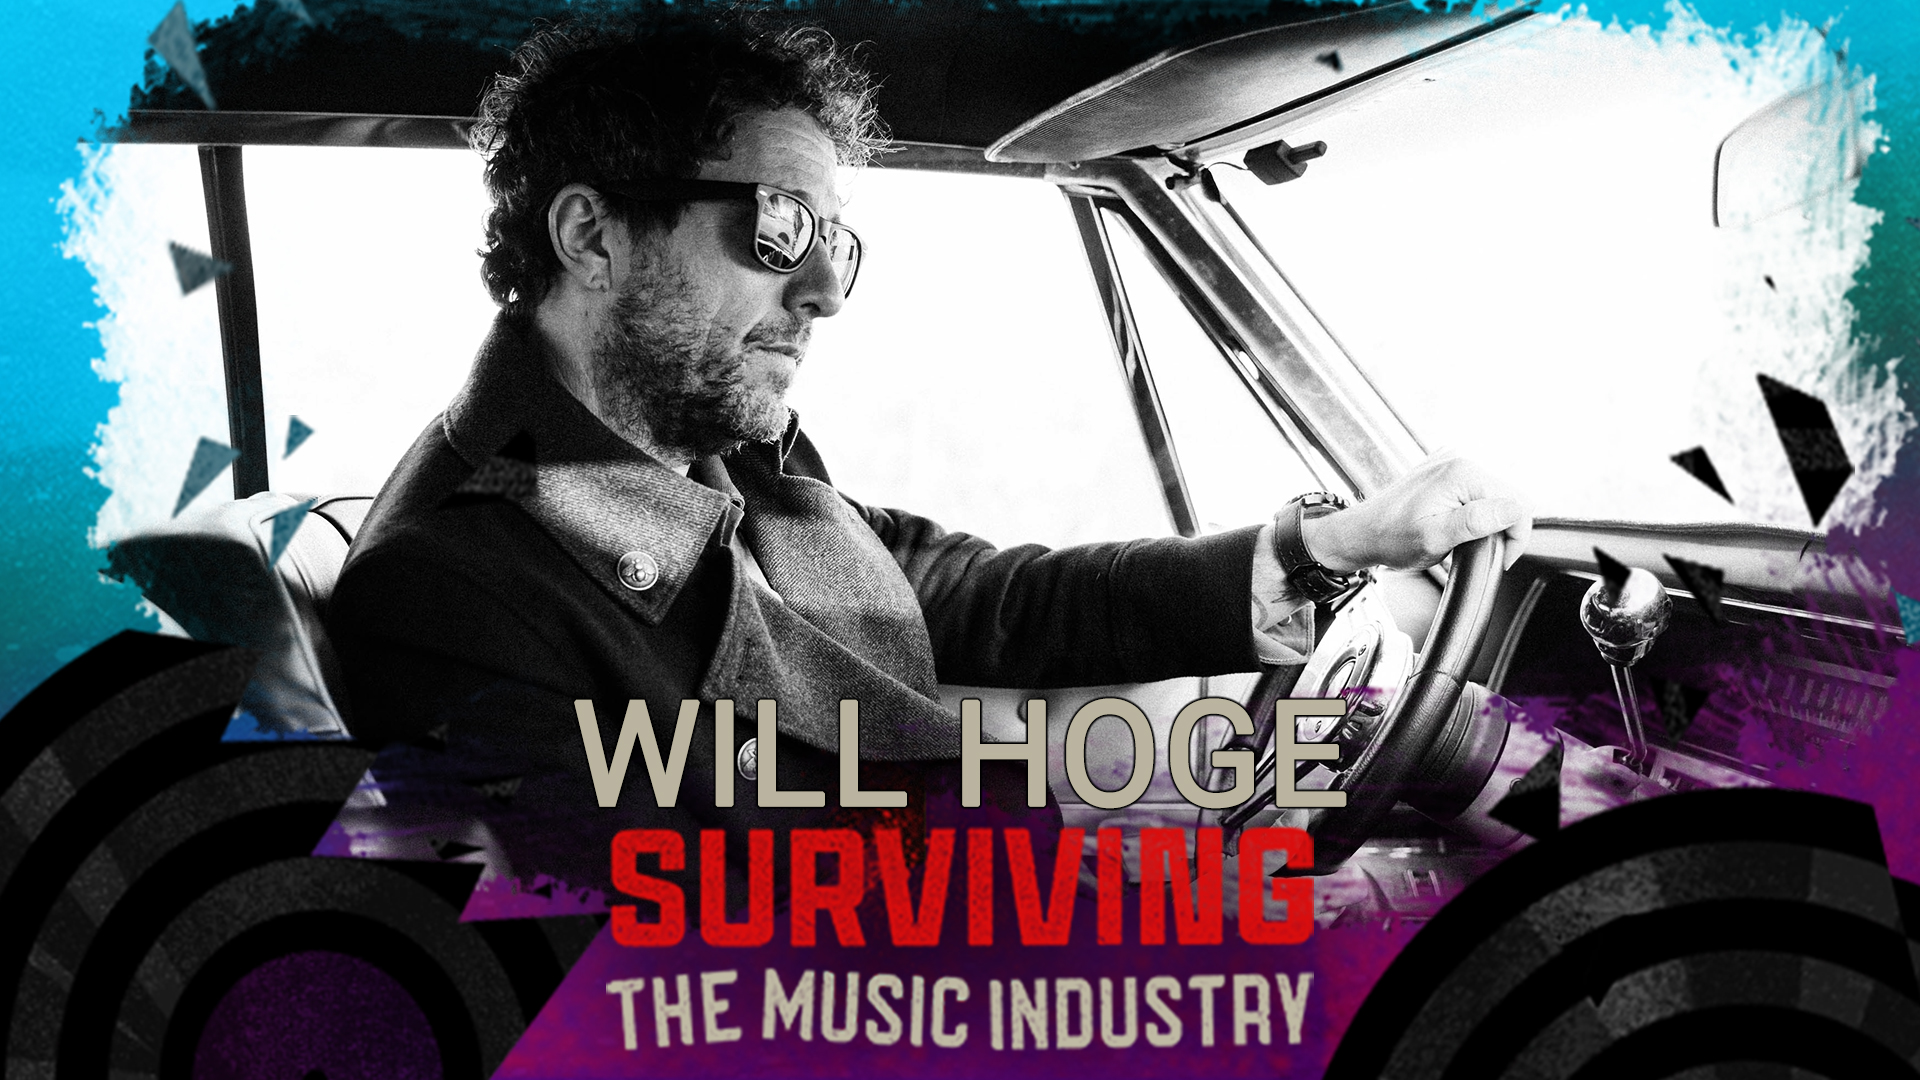 Singer/Songwriter Will Hoge Talks About Holding on to Dreams with ‘SMI’